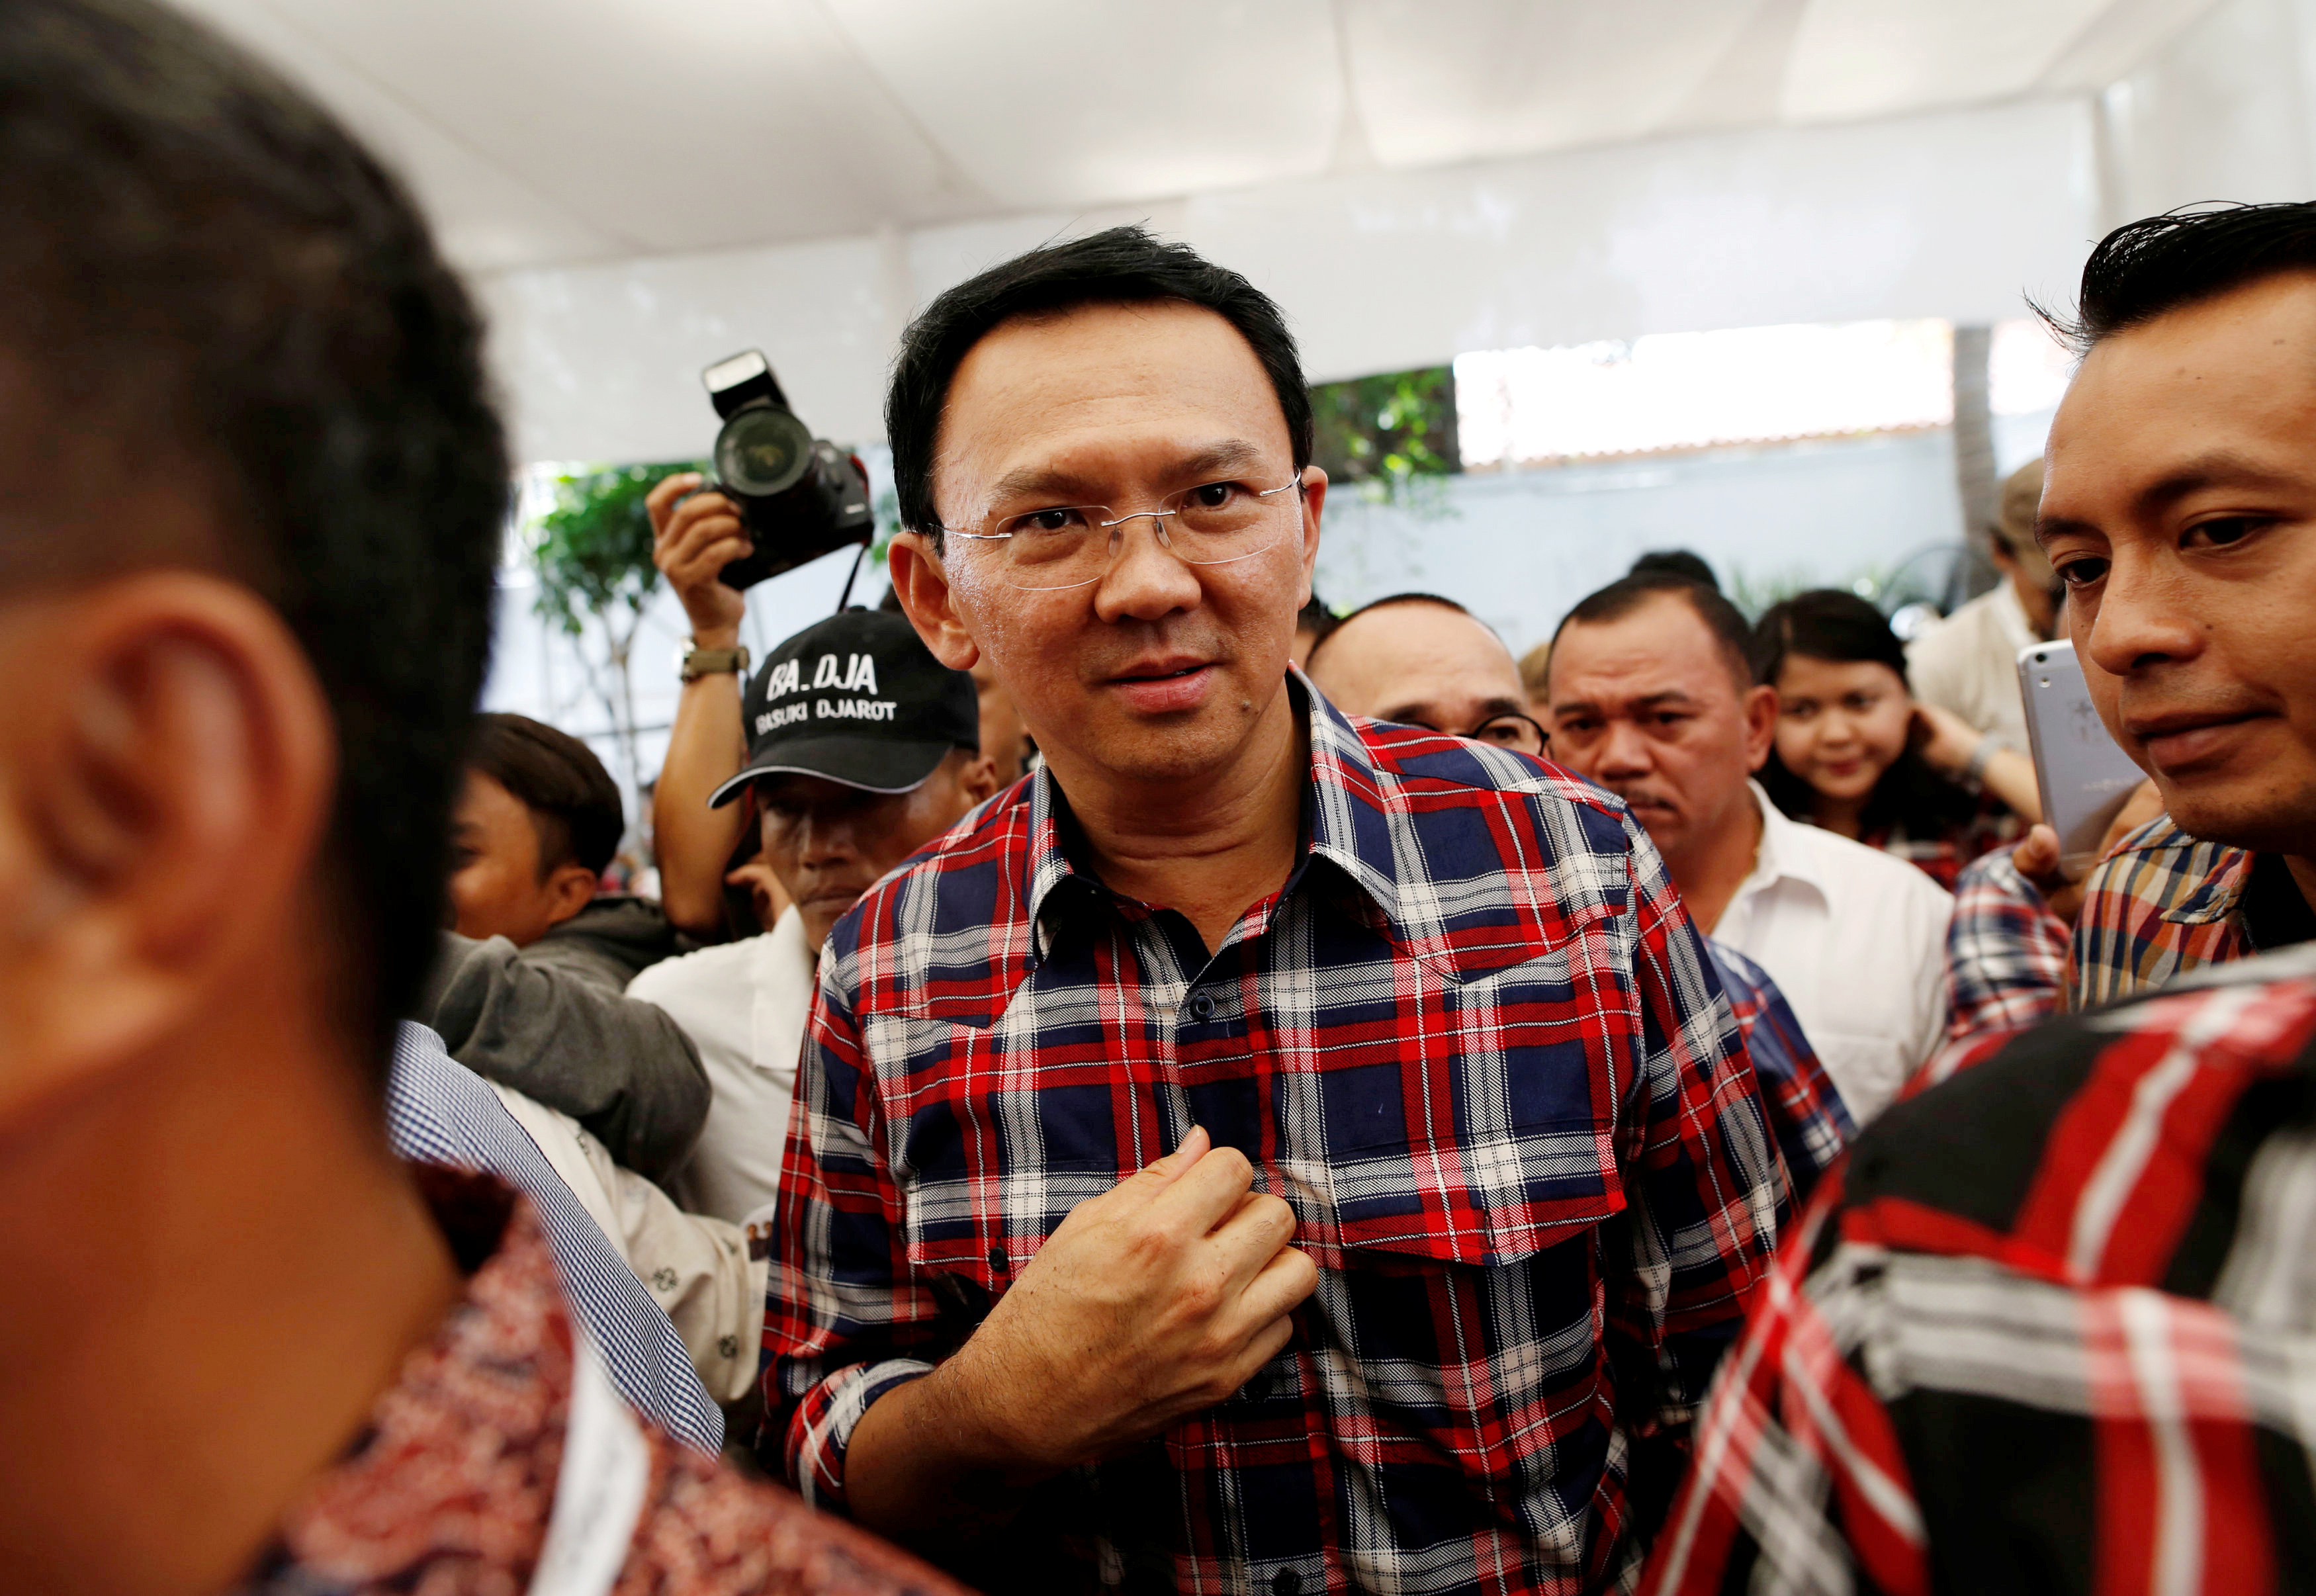 Jakarta Governor Basuki Tjahaja Purnama, nicknamed "Ahok," leaves the stage after meeting with supporters while campaigning for an upcoming election in Jakarta on Nov. 16, 2016 (Darren Whiteside—Reuters)